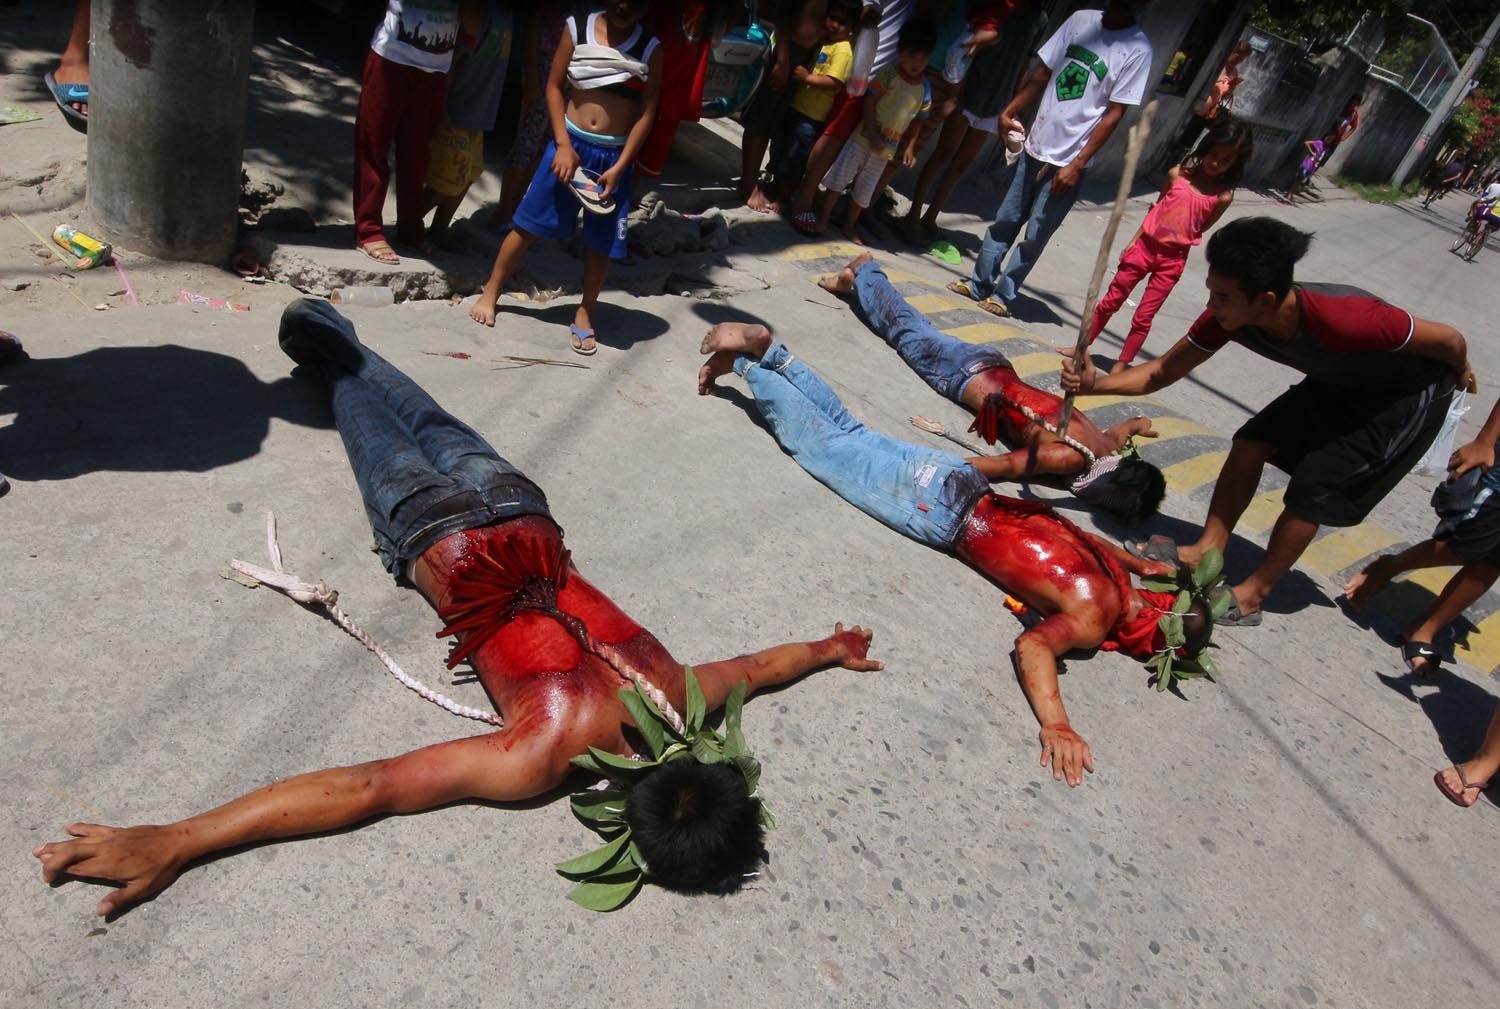 OFFERING. A man whips a devotee lying on the ground. Photo by Darren Langit 